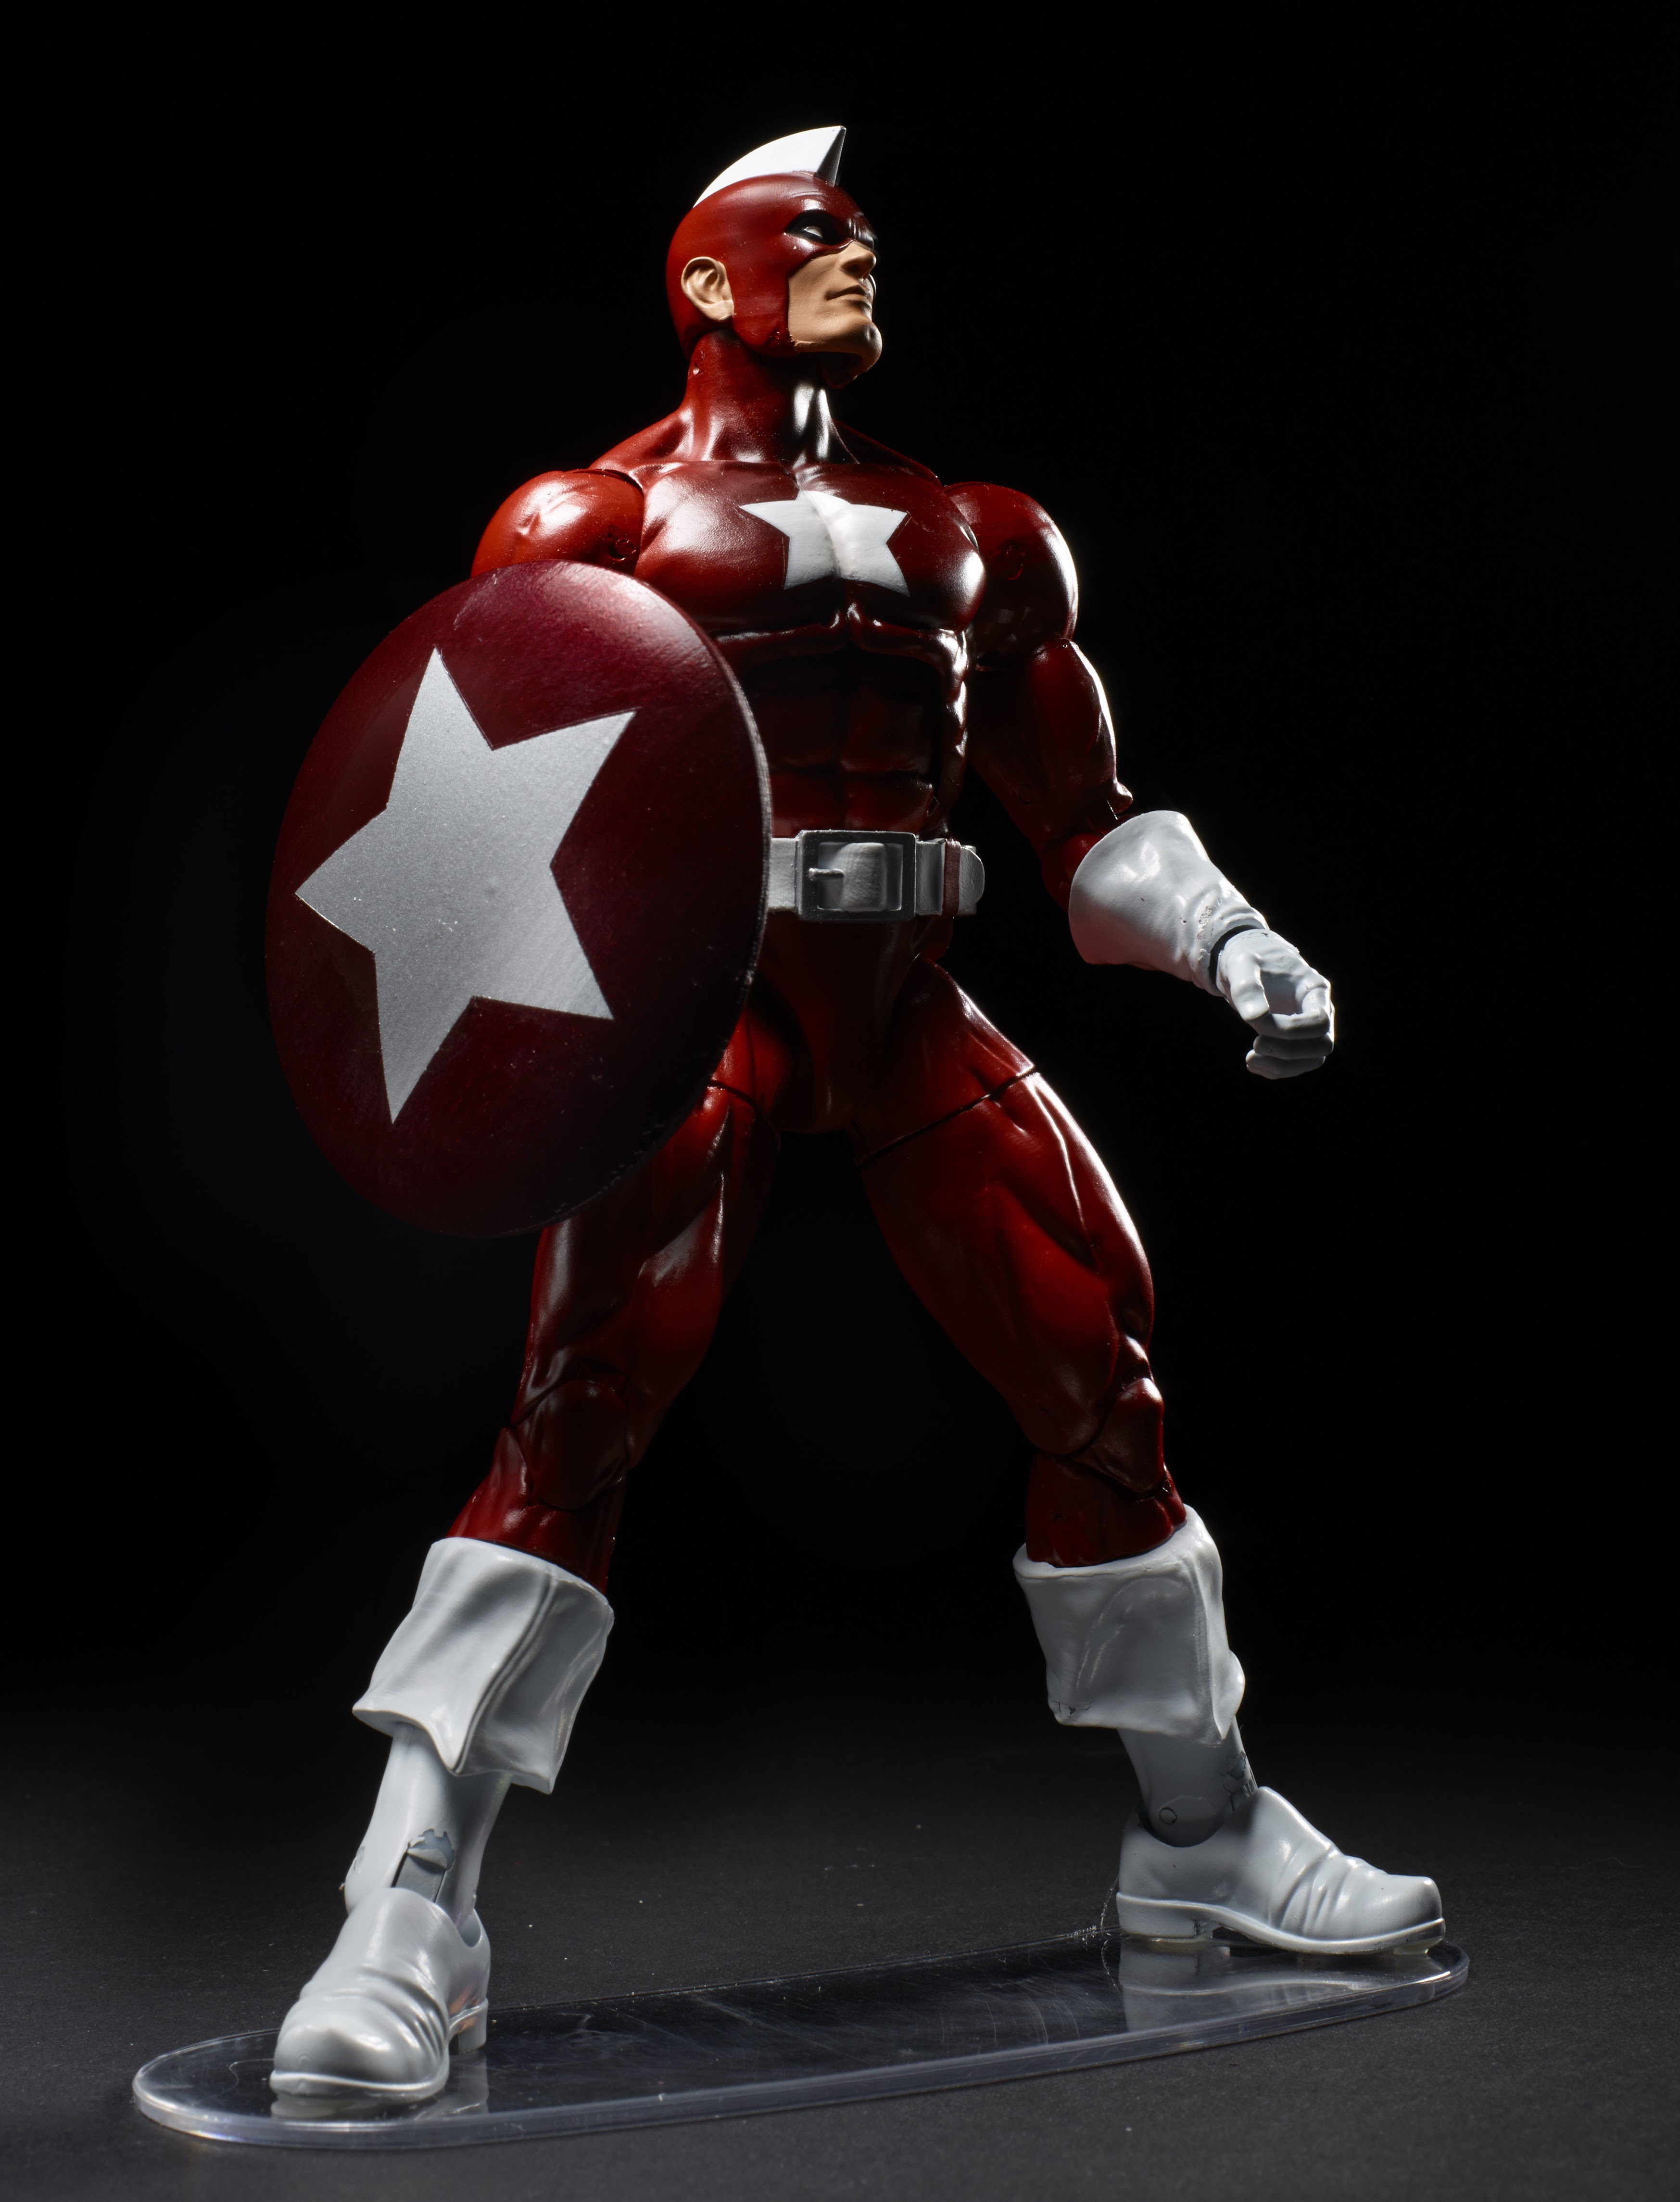 CaptainAmerica6Inchwave2RedGuardian Large 300DPI Large Batch of Hasbro Marvel & Star Wars Figure Images From Toy Fair